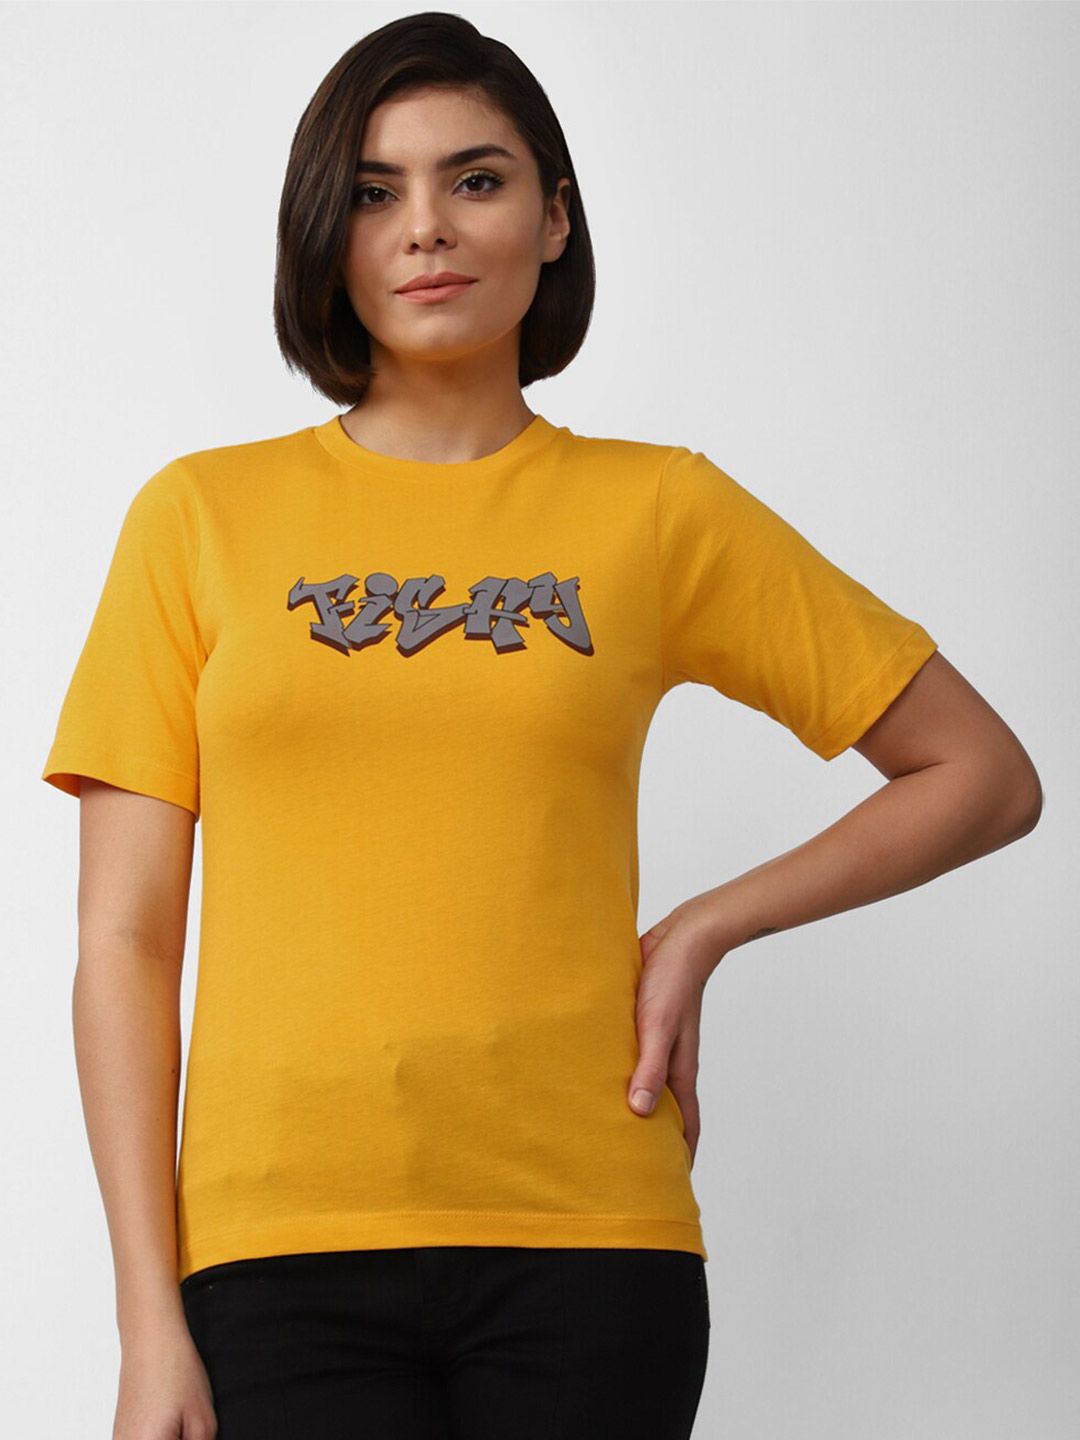 FOREVER 21 Women Yellow Typography Printed Top Price in India